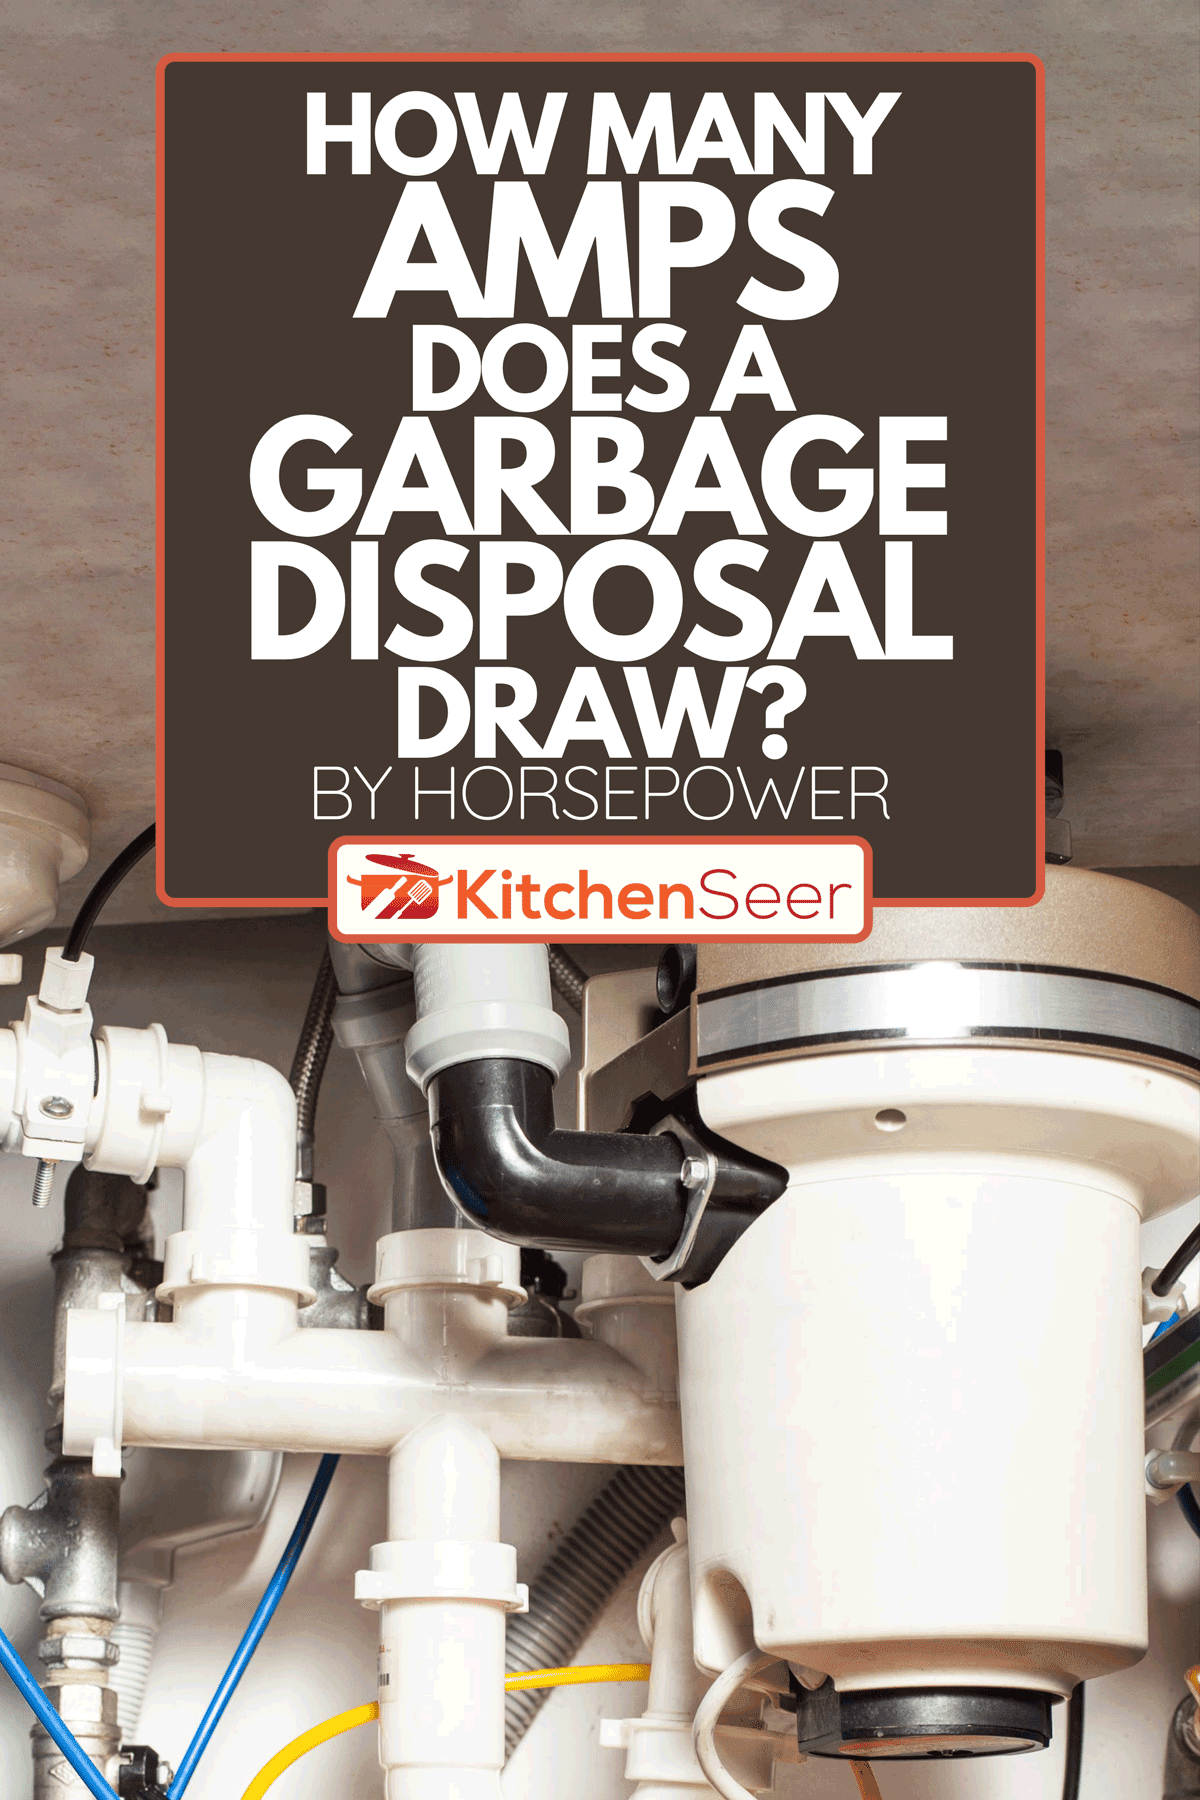 A plumber checking garbage disposal, How Many Amps Does A Garbage Disposal Draw? [By Horsepower]